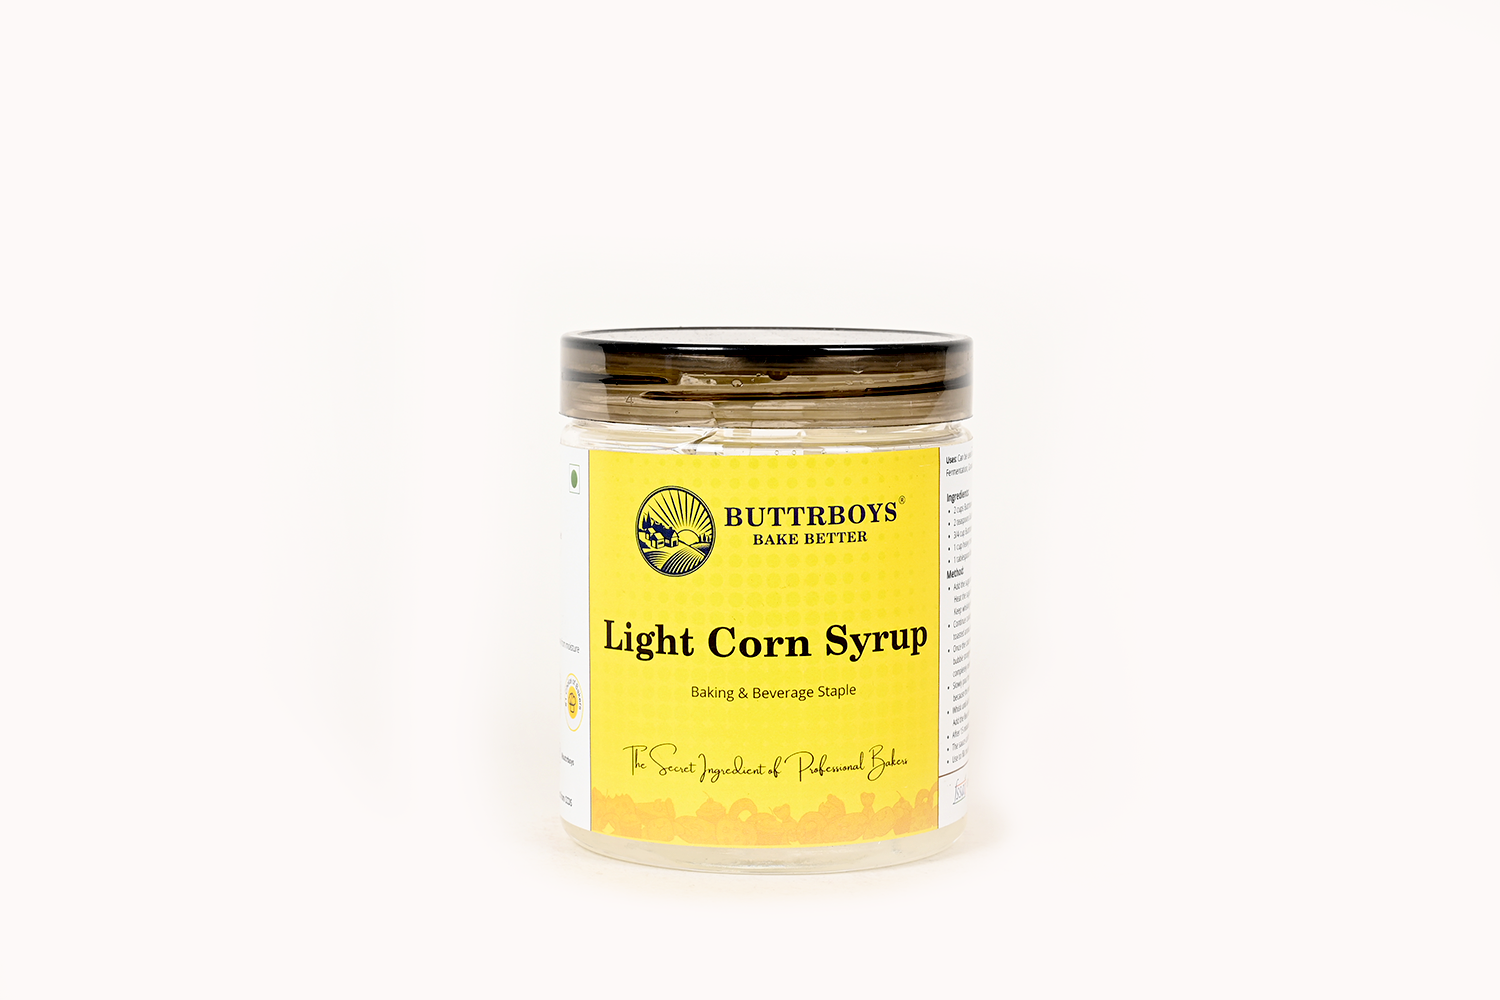 Butterboys Light Corn Syrup